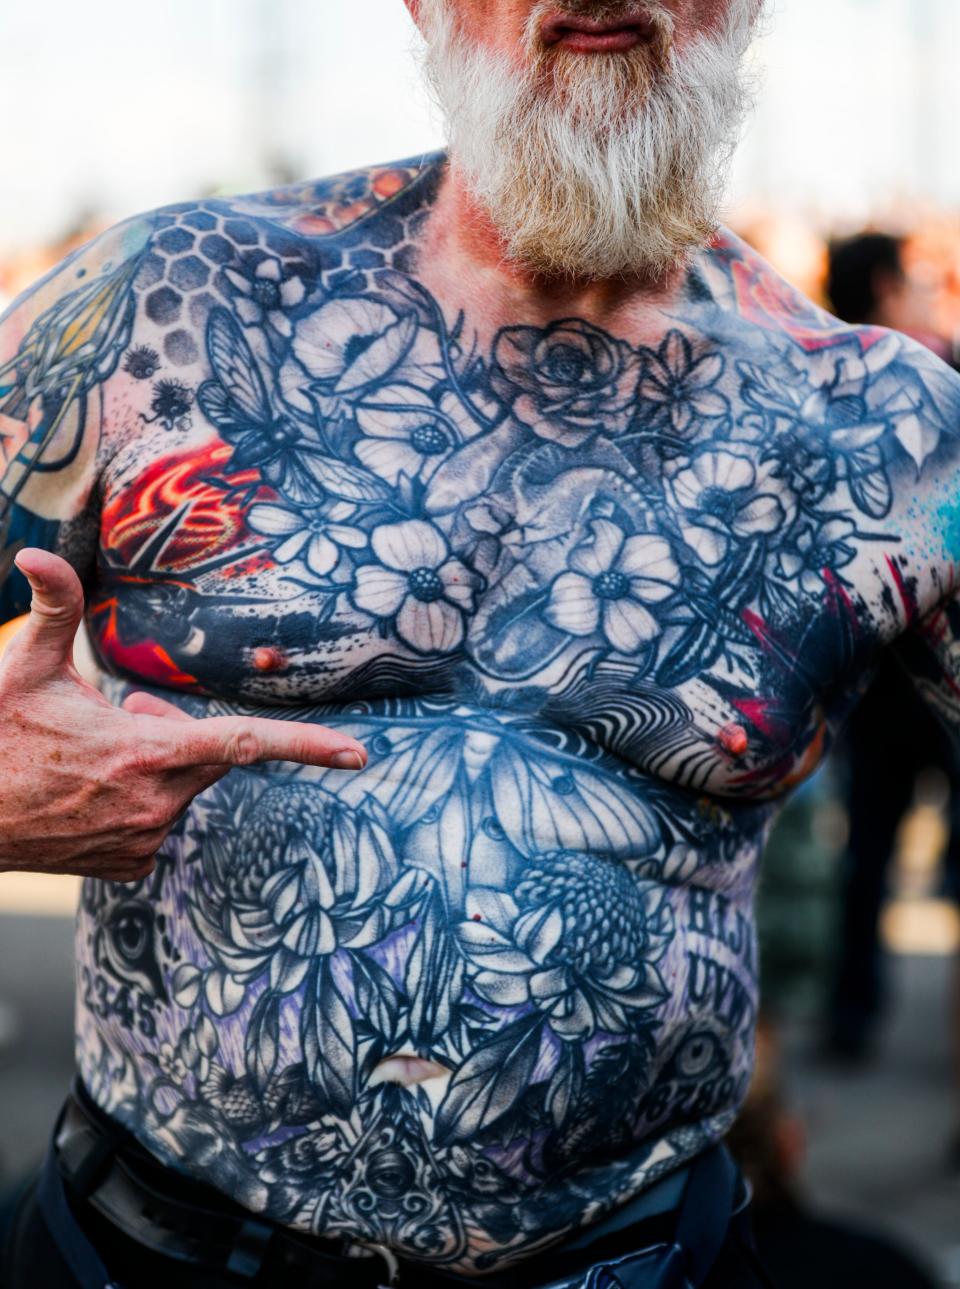 One man proudly showed off his body art at Friday's Louder Than Life music festival. Sept. 22, 2023